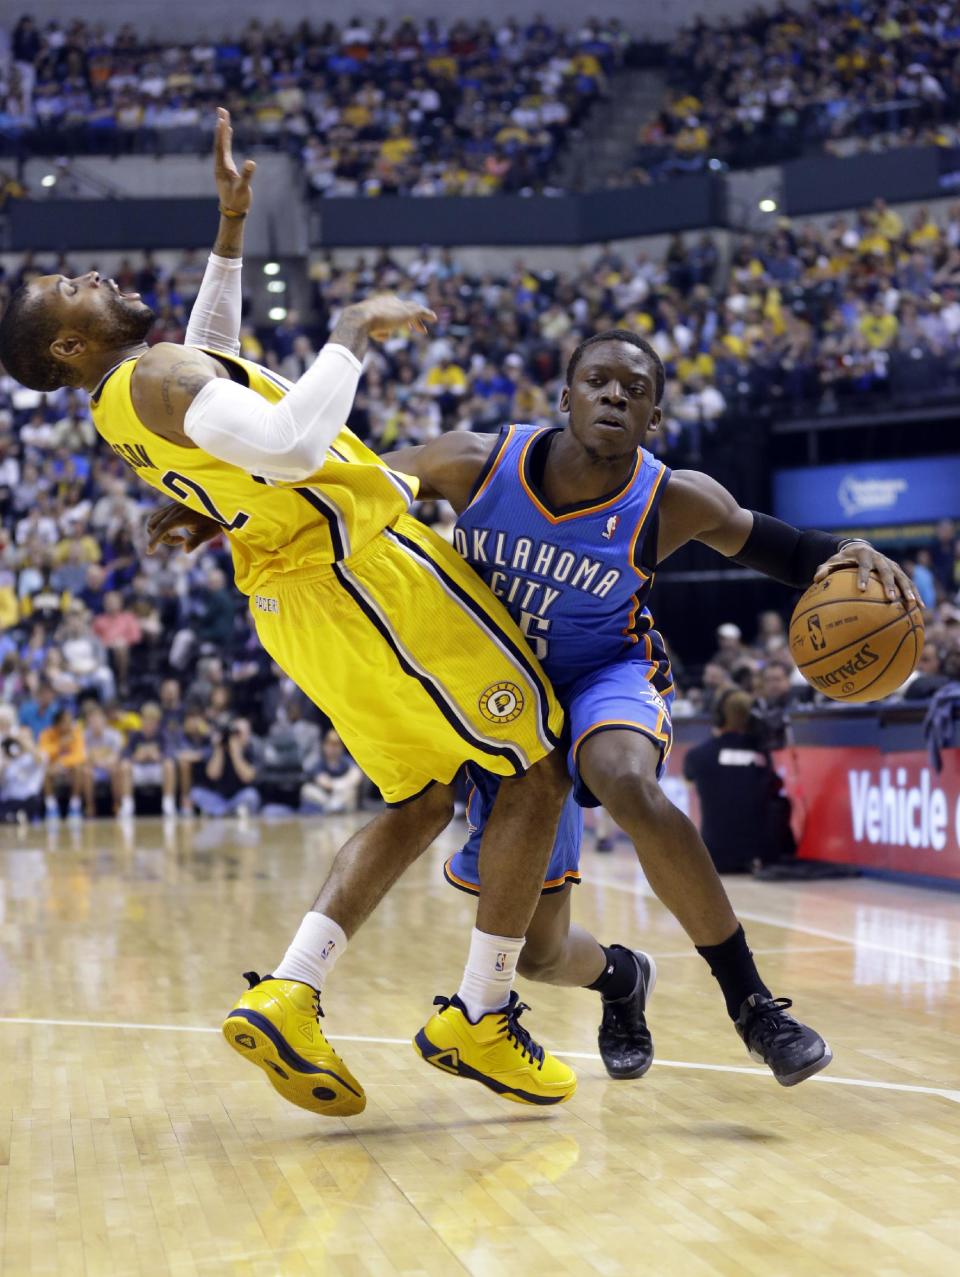 Indiana Pacers guard C.J. Watson, left, draws an offensive foul from Oklahoma City Thunder guard Reggie Jackson in the second half of an NBA basketball game in Indianapolis, Sunday, April 13, 2014. (AP Photo/Michael Conroy)